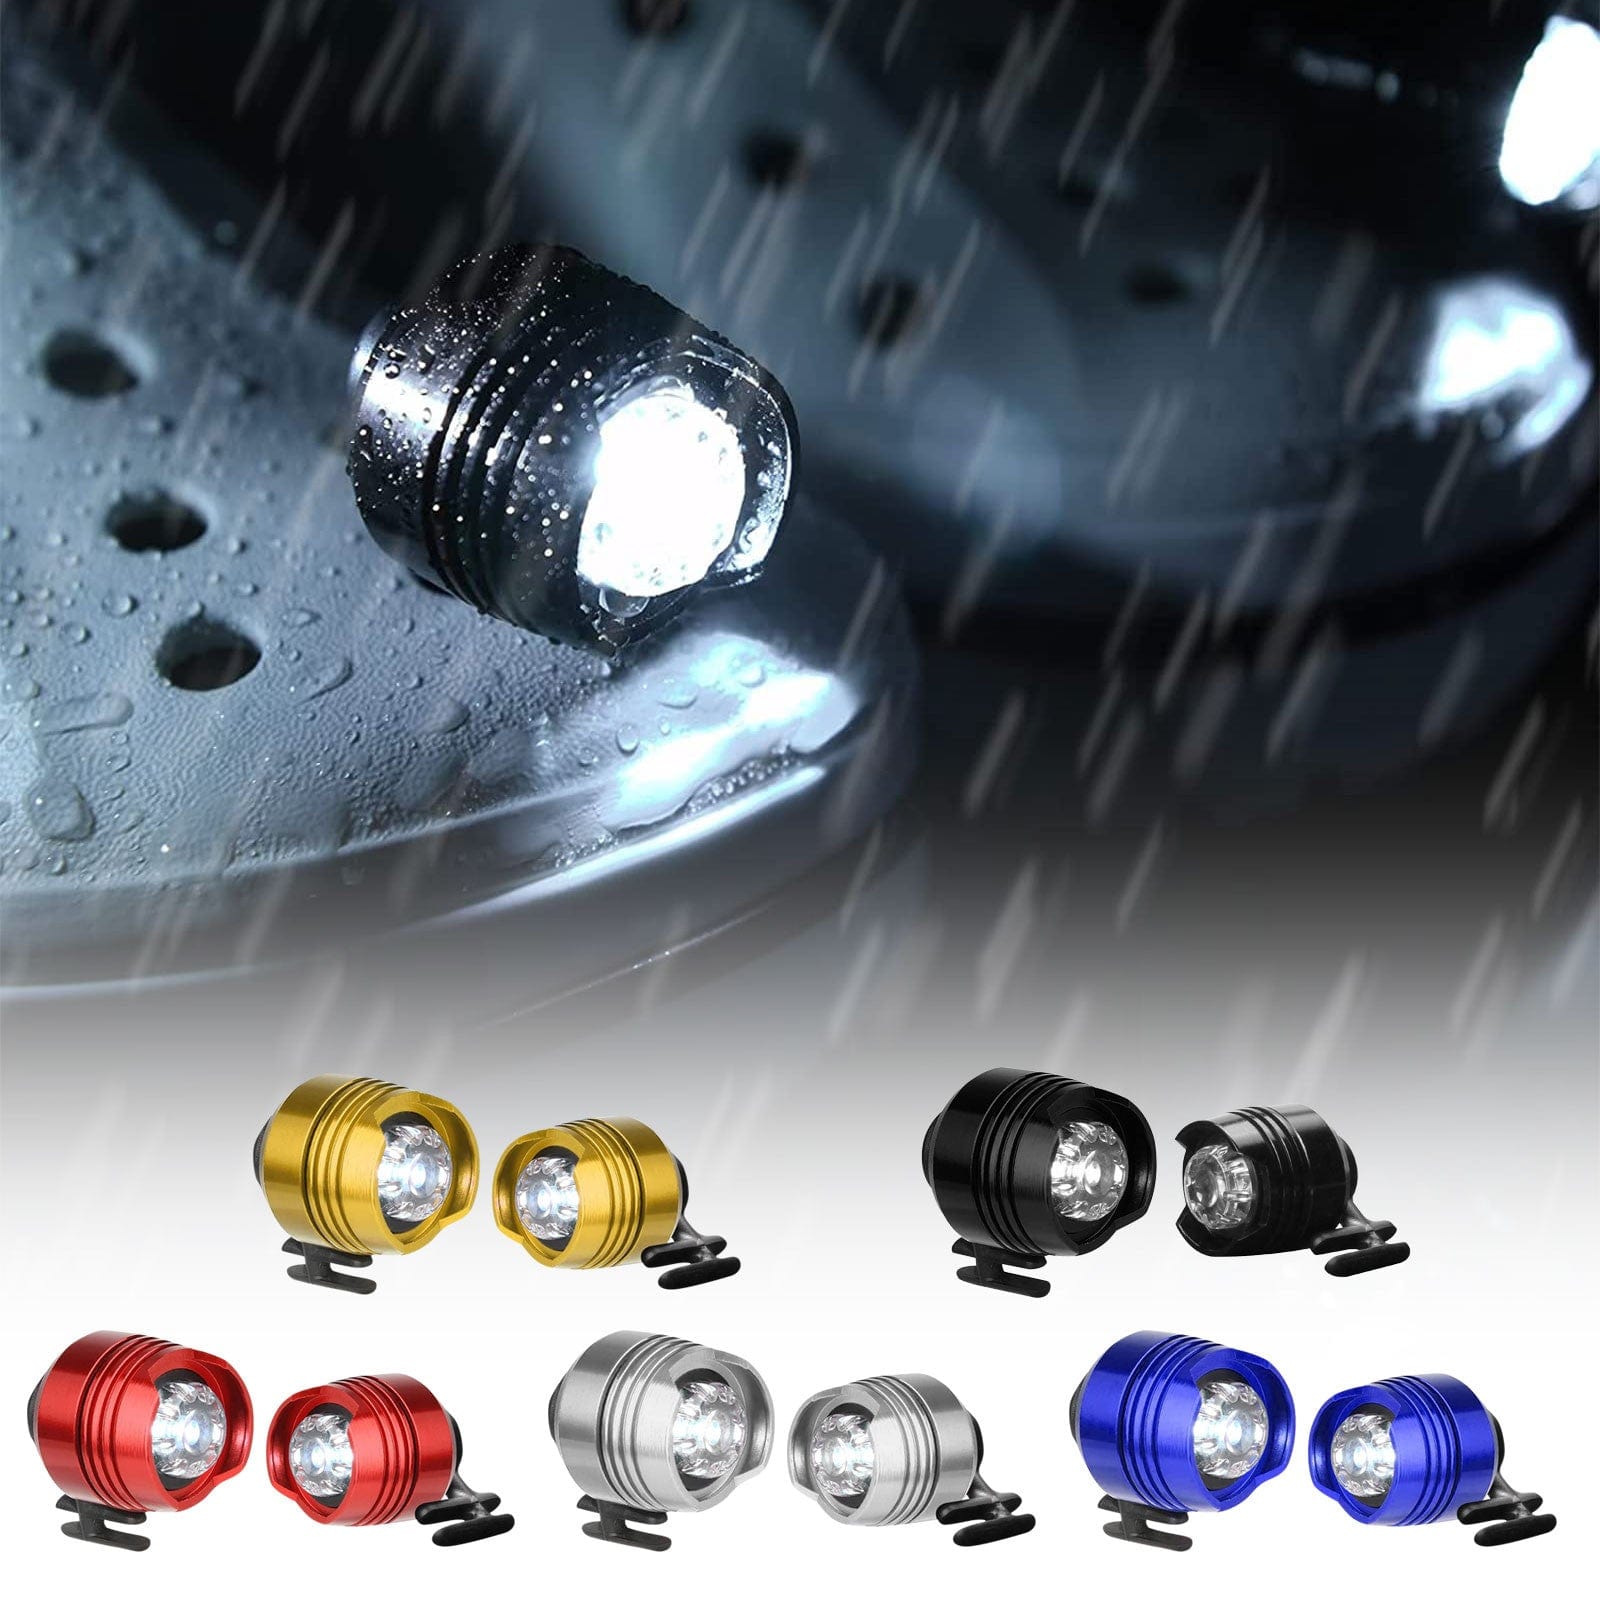 shop.plusyouclub 0 LED Headlights For Holes Shoes IPX5 Waterproof Shoes Light 3 Modes 72 Hours Glowing Small Lights For Dog Walking Camping Outdoor